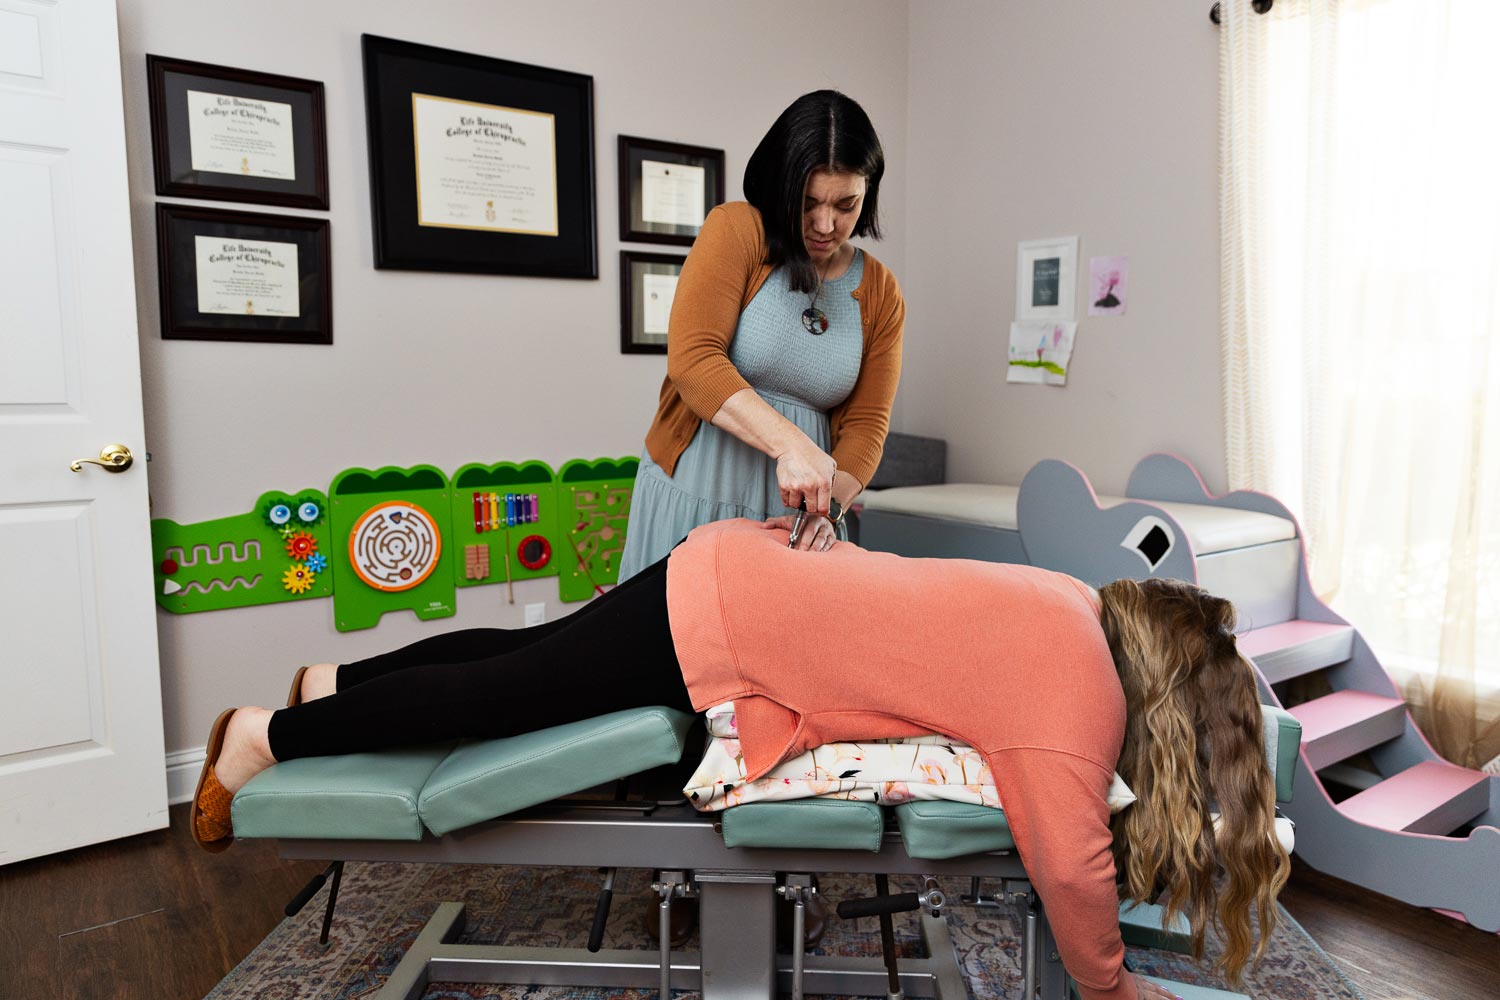 Dr. Kristin Smith at Life Care Family Wellness Chiropractic adjusting a prenatal patient